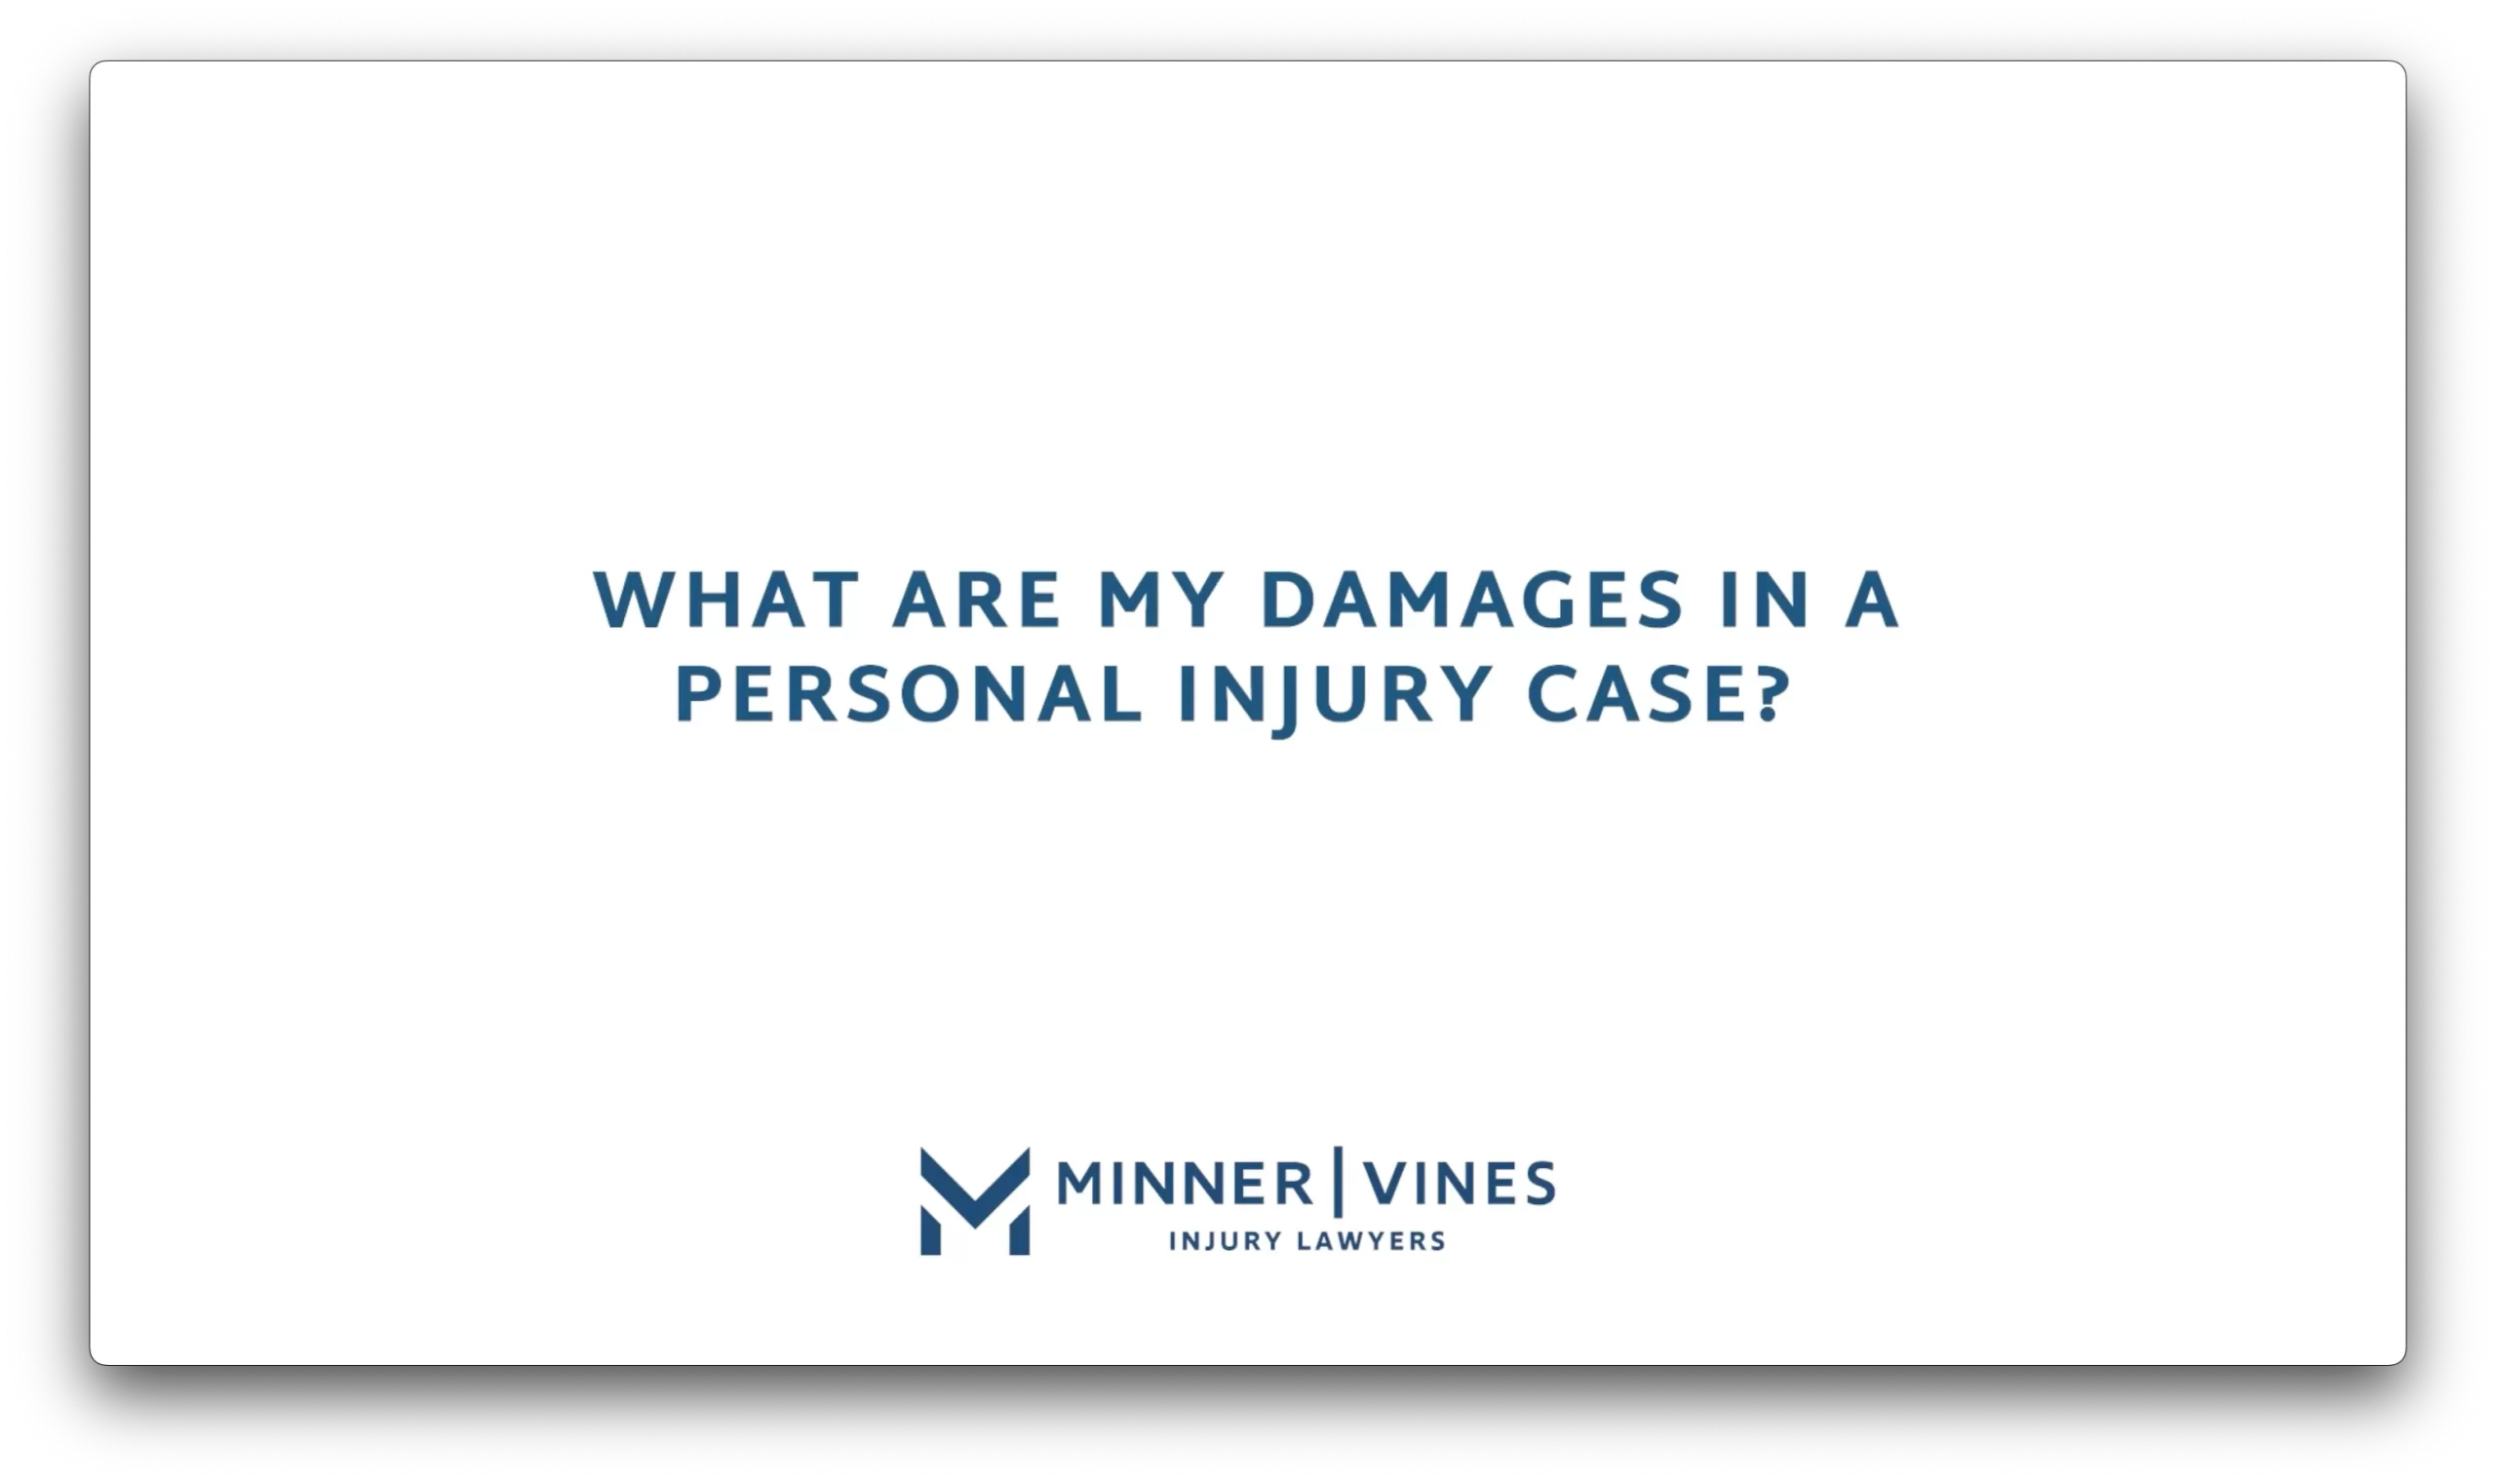 What are my damages in a personal injury case?